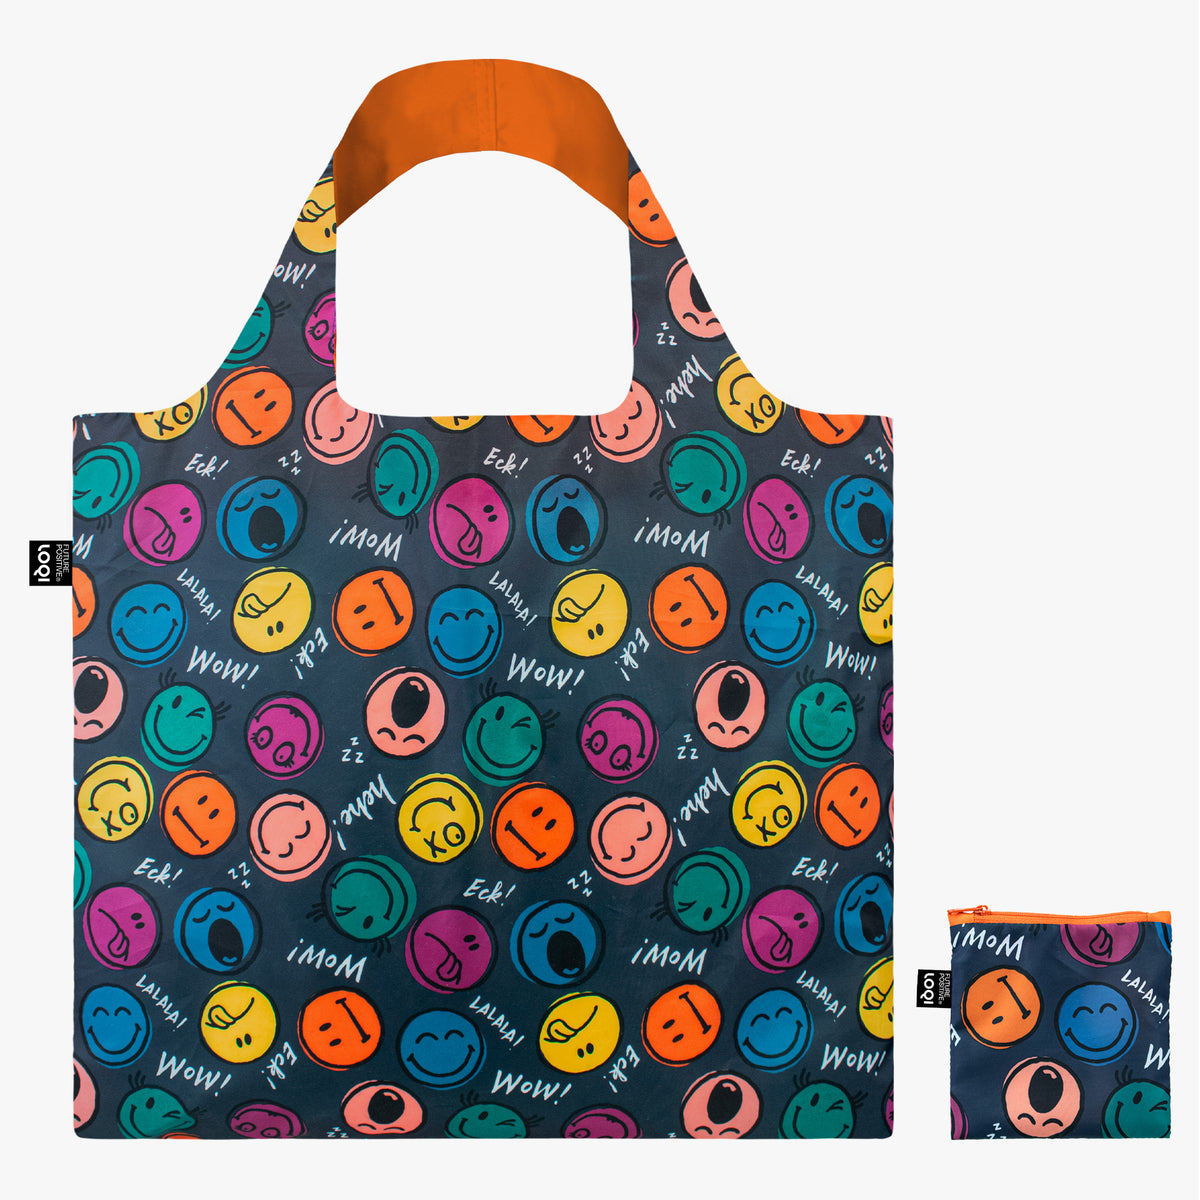 Boys and Girls Recycled Bag